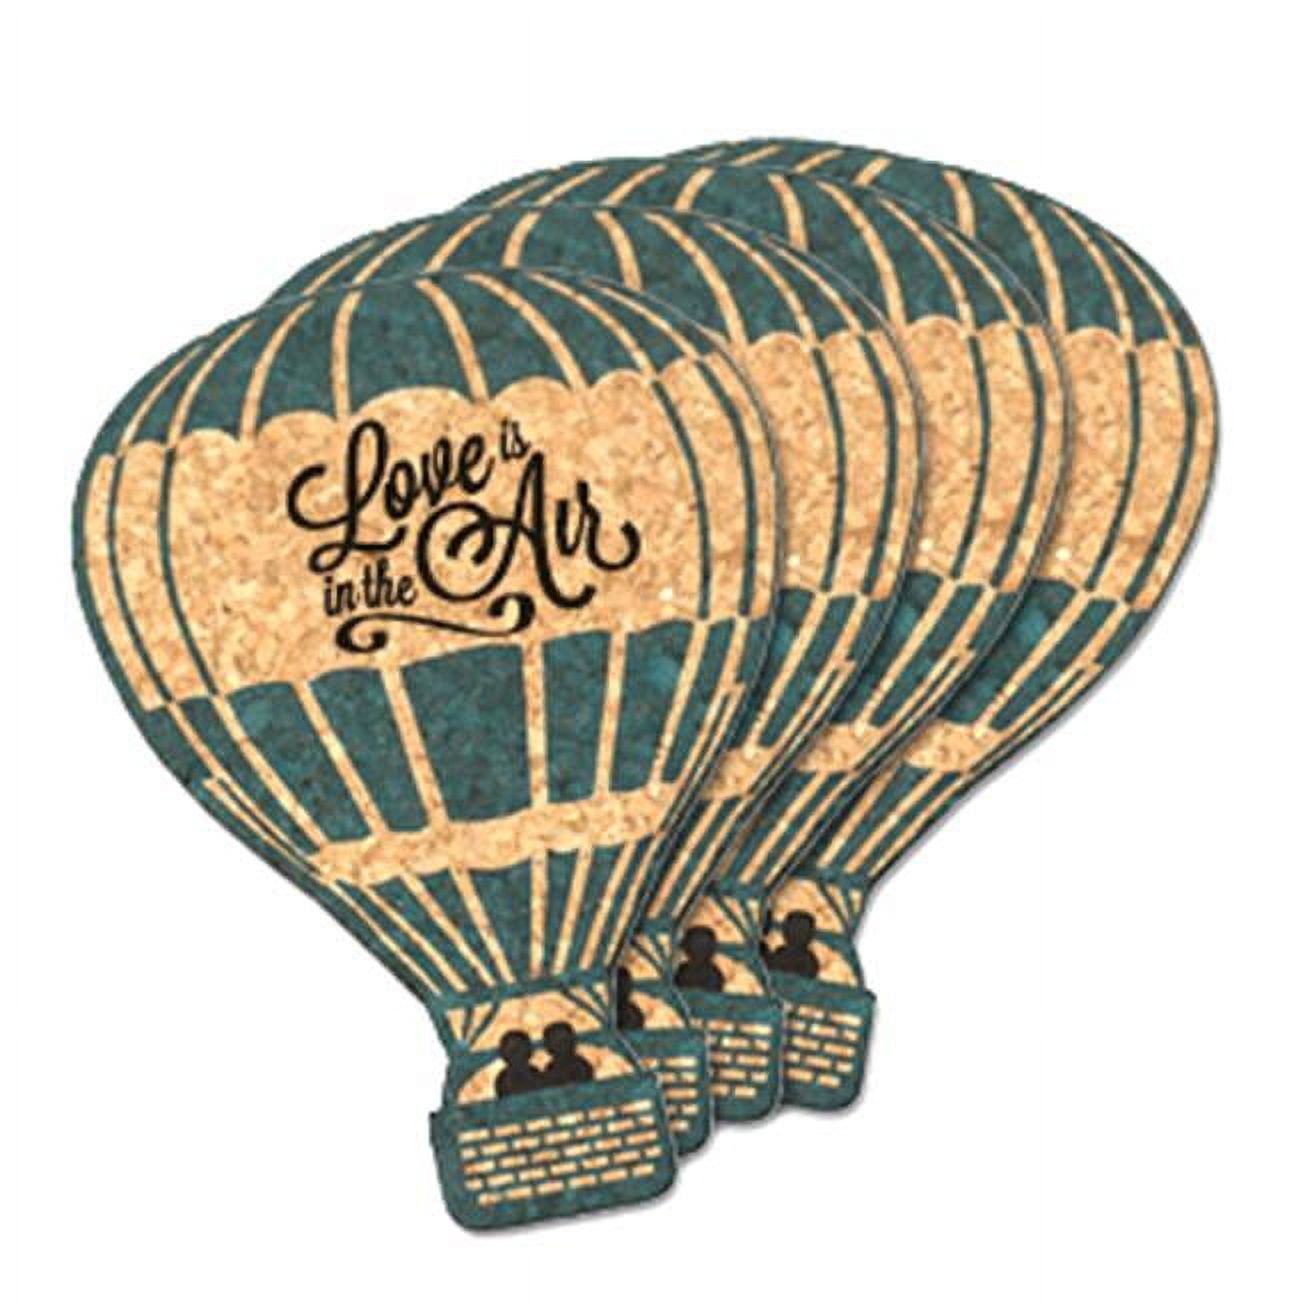 Picture of Ducky Days 8497195 3.73 x 5 in. Love is in the Air Hot Air Balloon Cork Coaster Wedding Favors - Set of 4